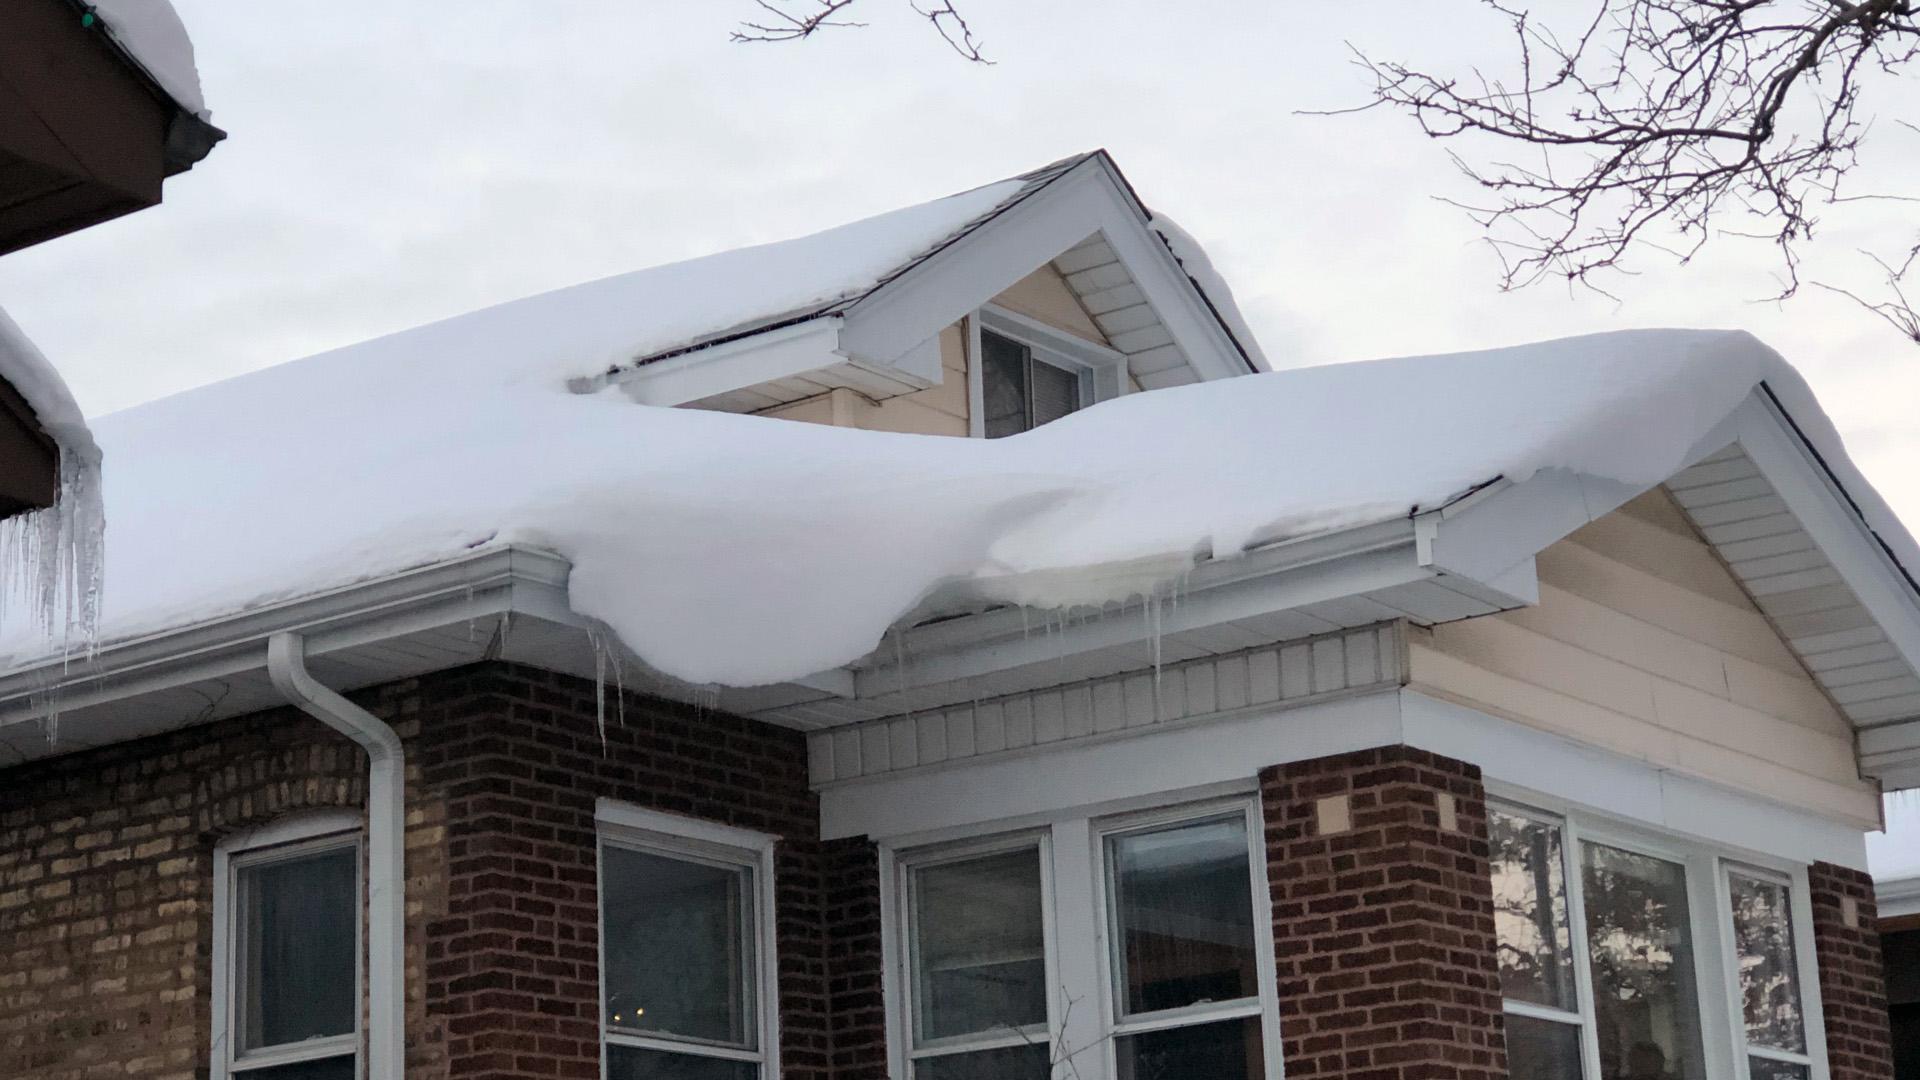 Keep an eye on roofs this weekend as snow begins to melt. (Patty Wetli / WTTW News)